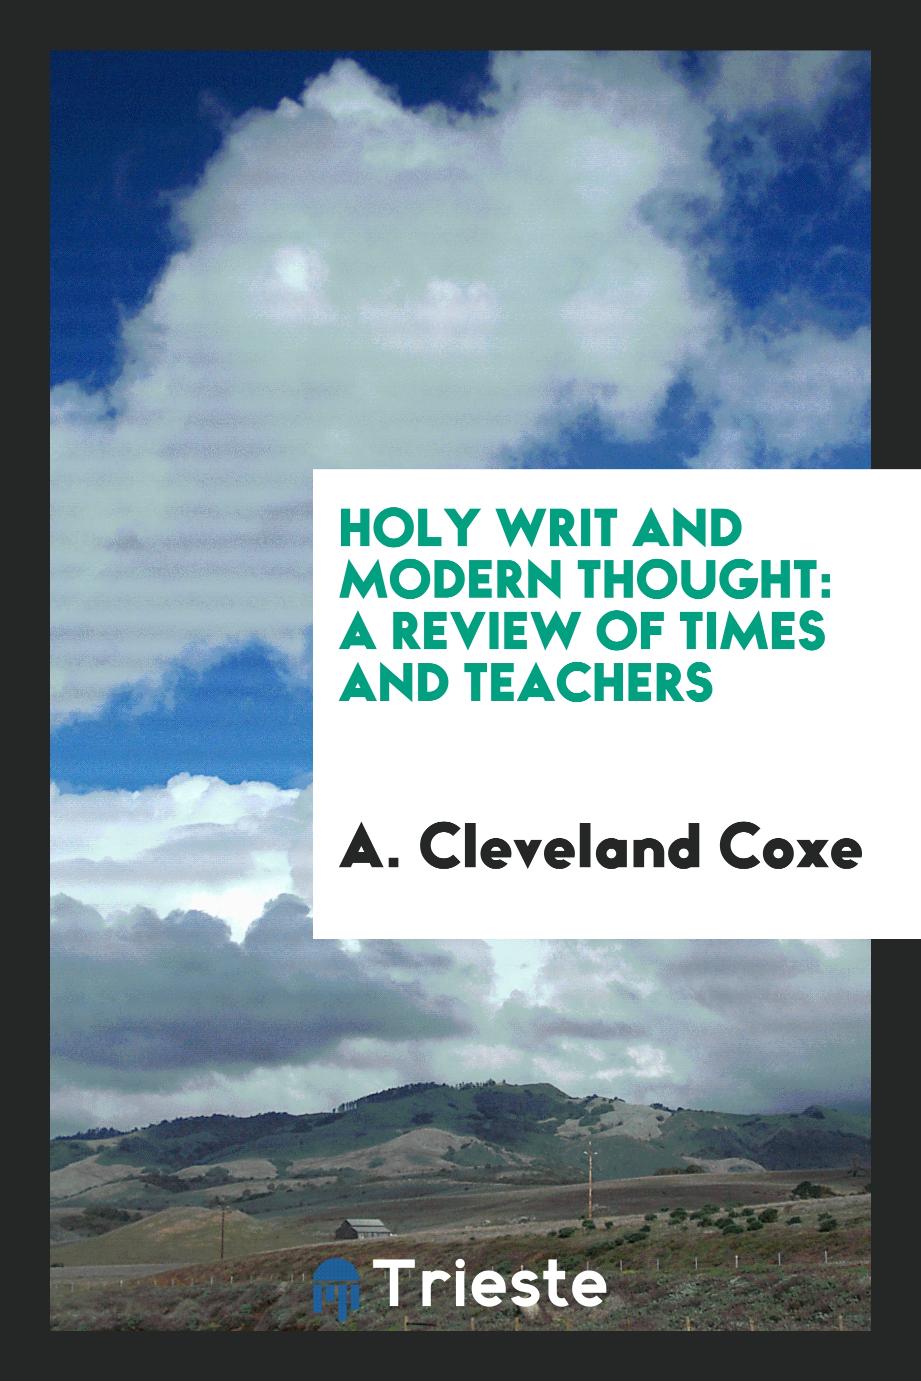 A. Cleveland Coxe - Holy writ and modern thought: a review of times and teachers